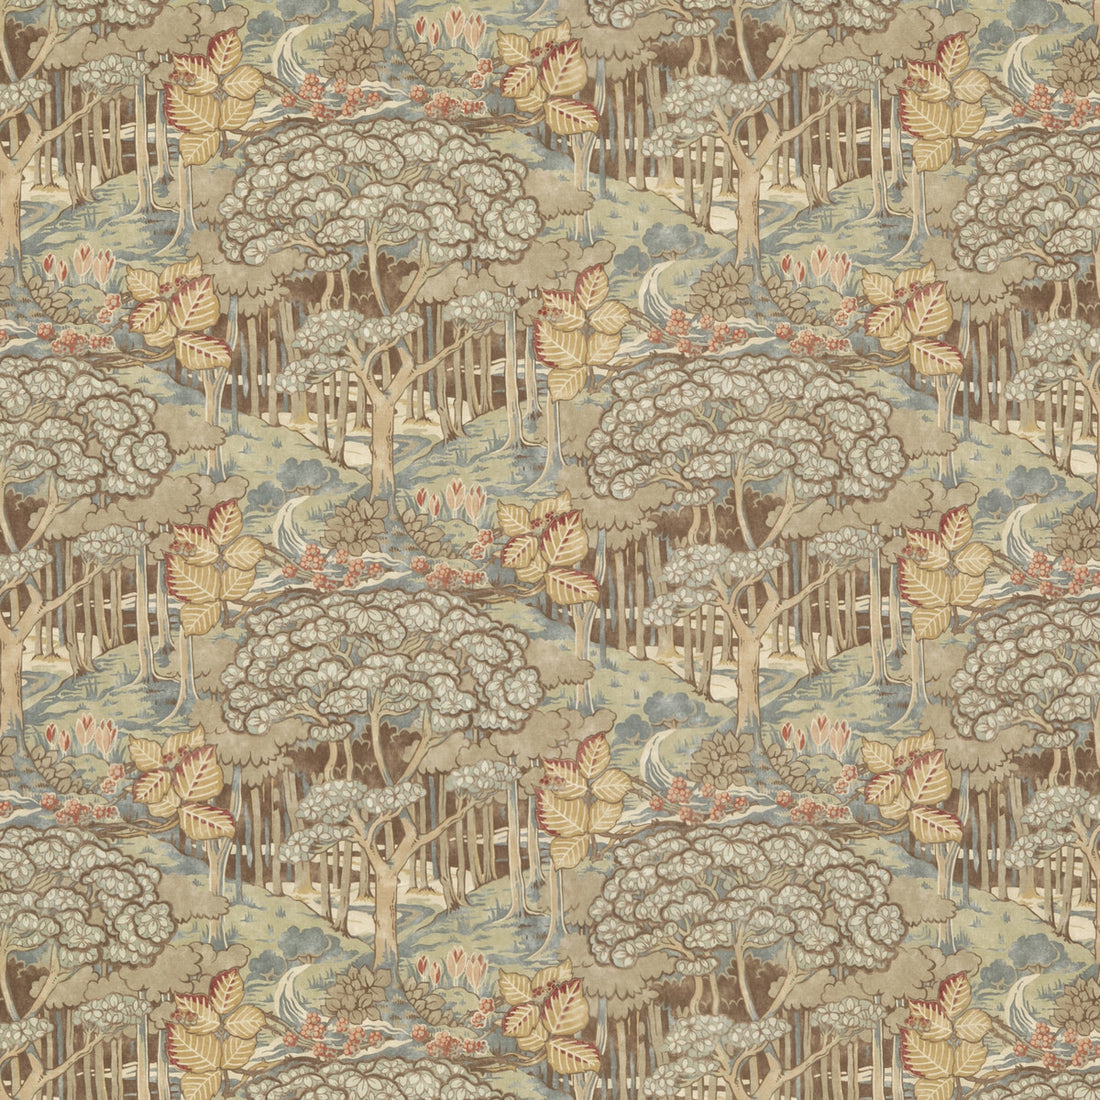 Ruskin Cotton fabric in teal color - pattern BP10971.2.0 - by G P &amp; J Baker in the Original Brantwood Fabric collection